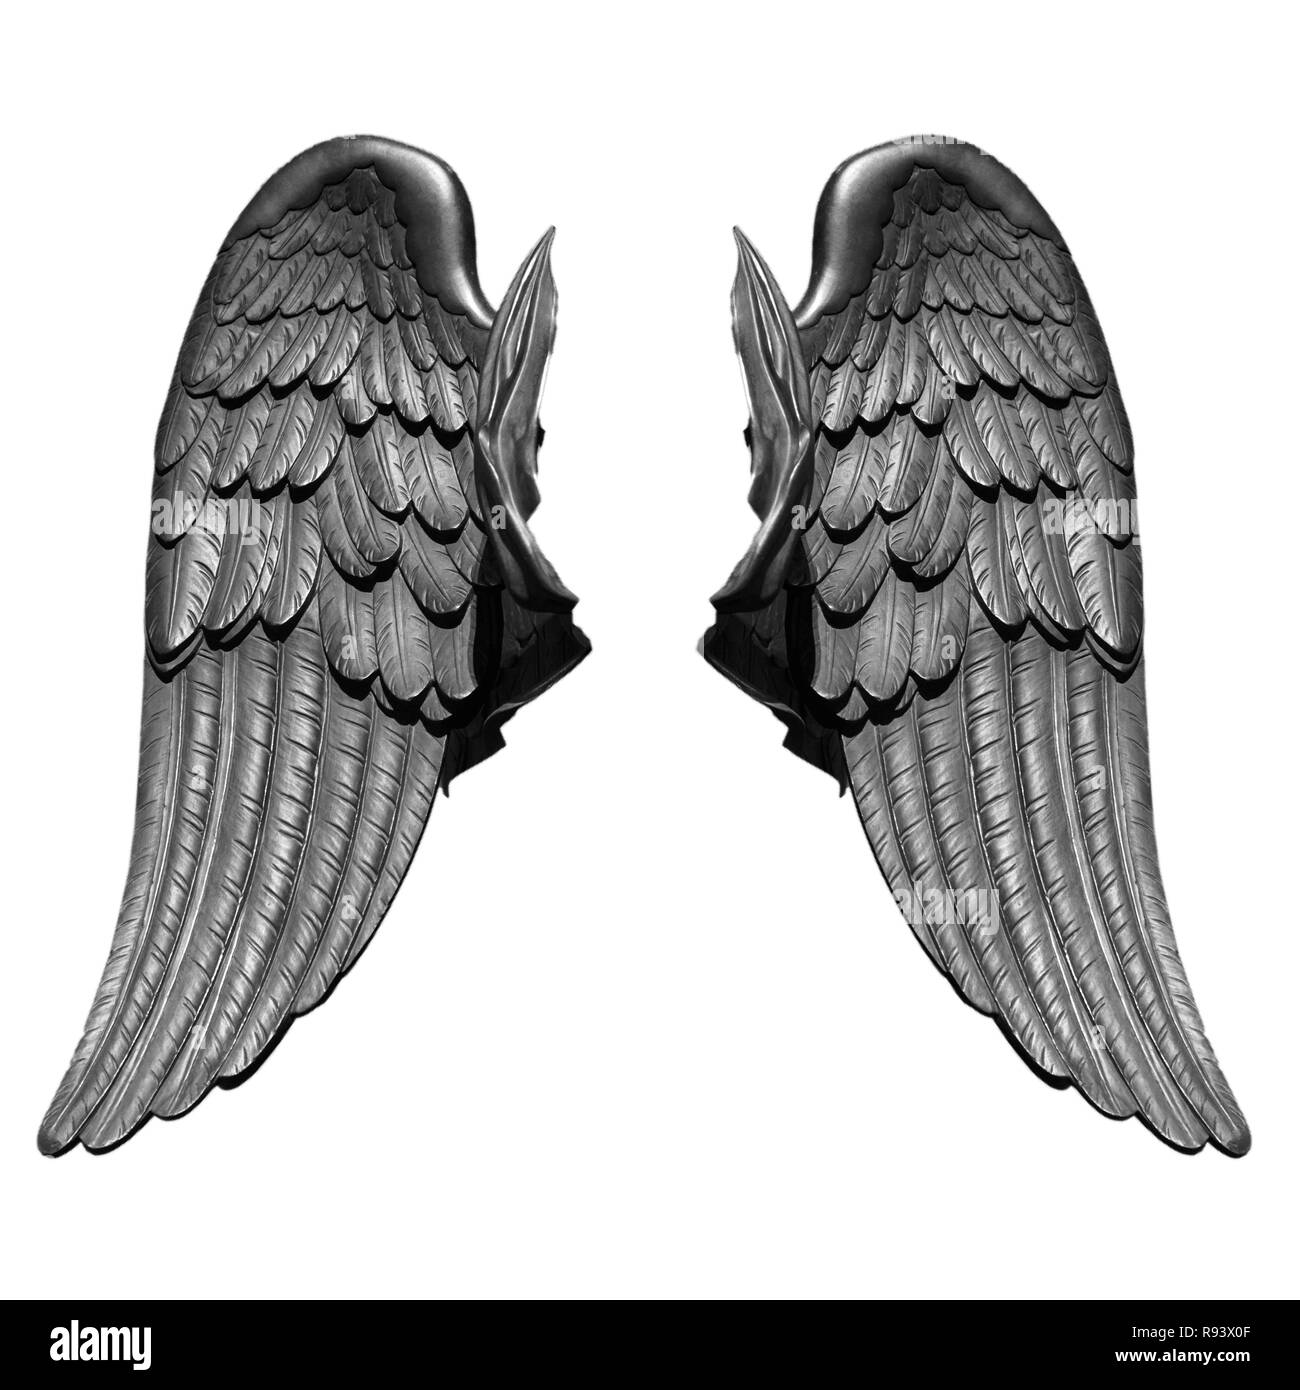 Angel wings isolated on white background. Stock Photo